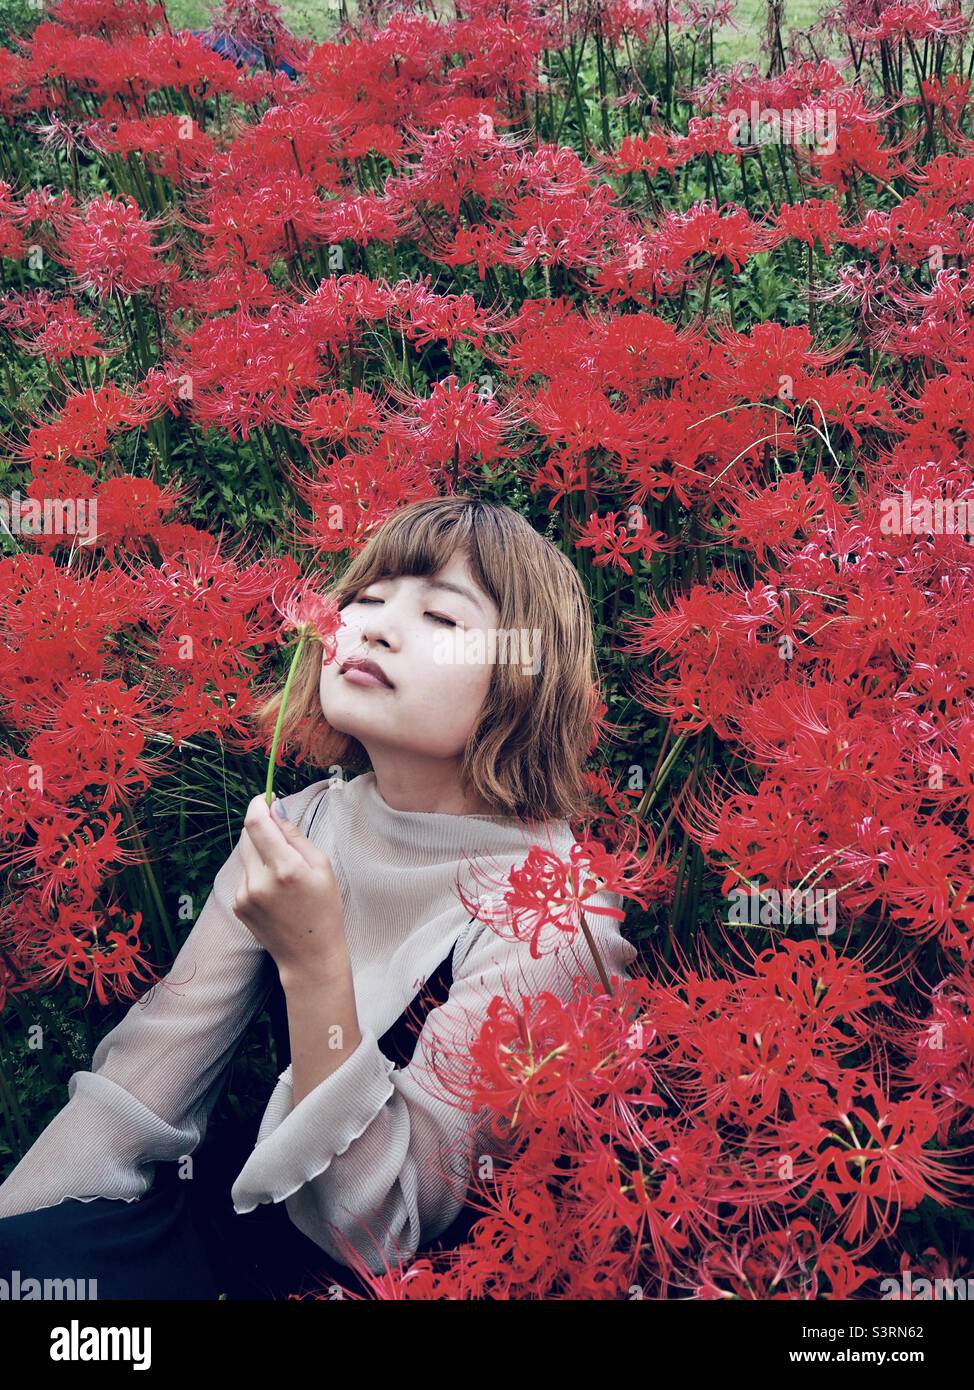 Japanese girl smelling the red flower Stock Photo